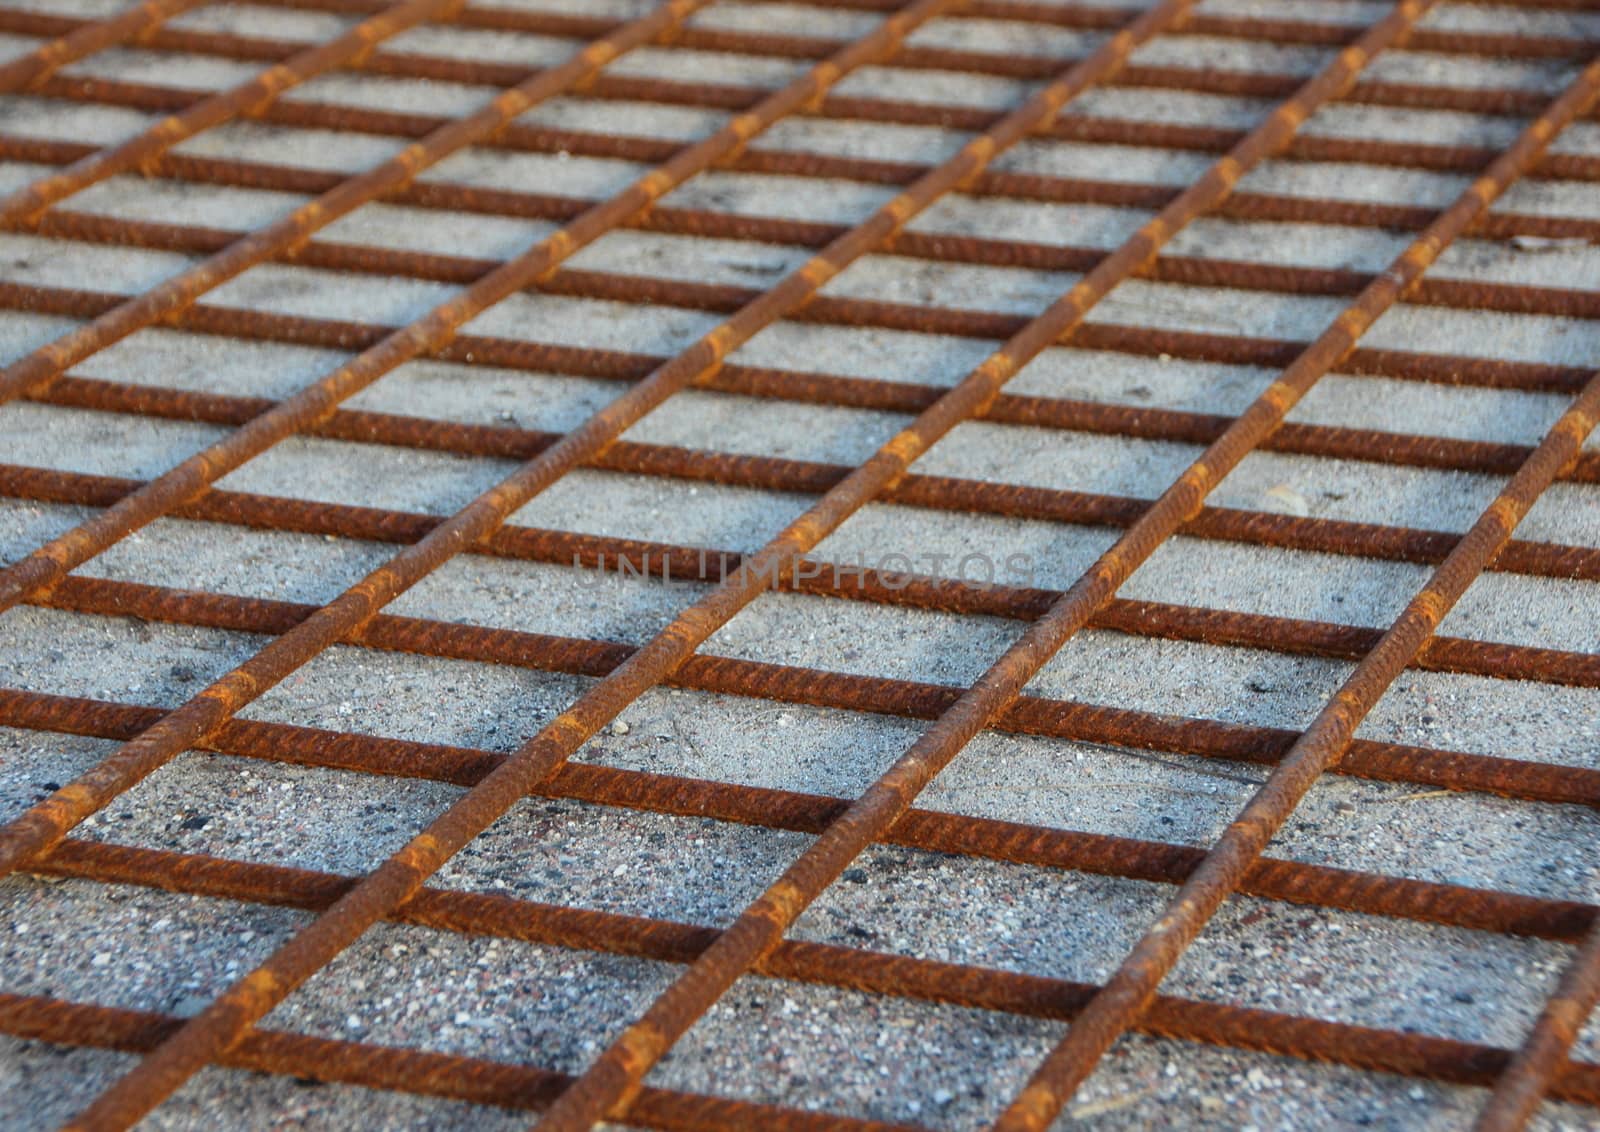 Rusty Metal Foundation Construction Grid on Sand Background